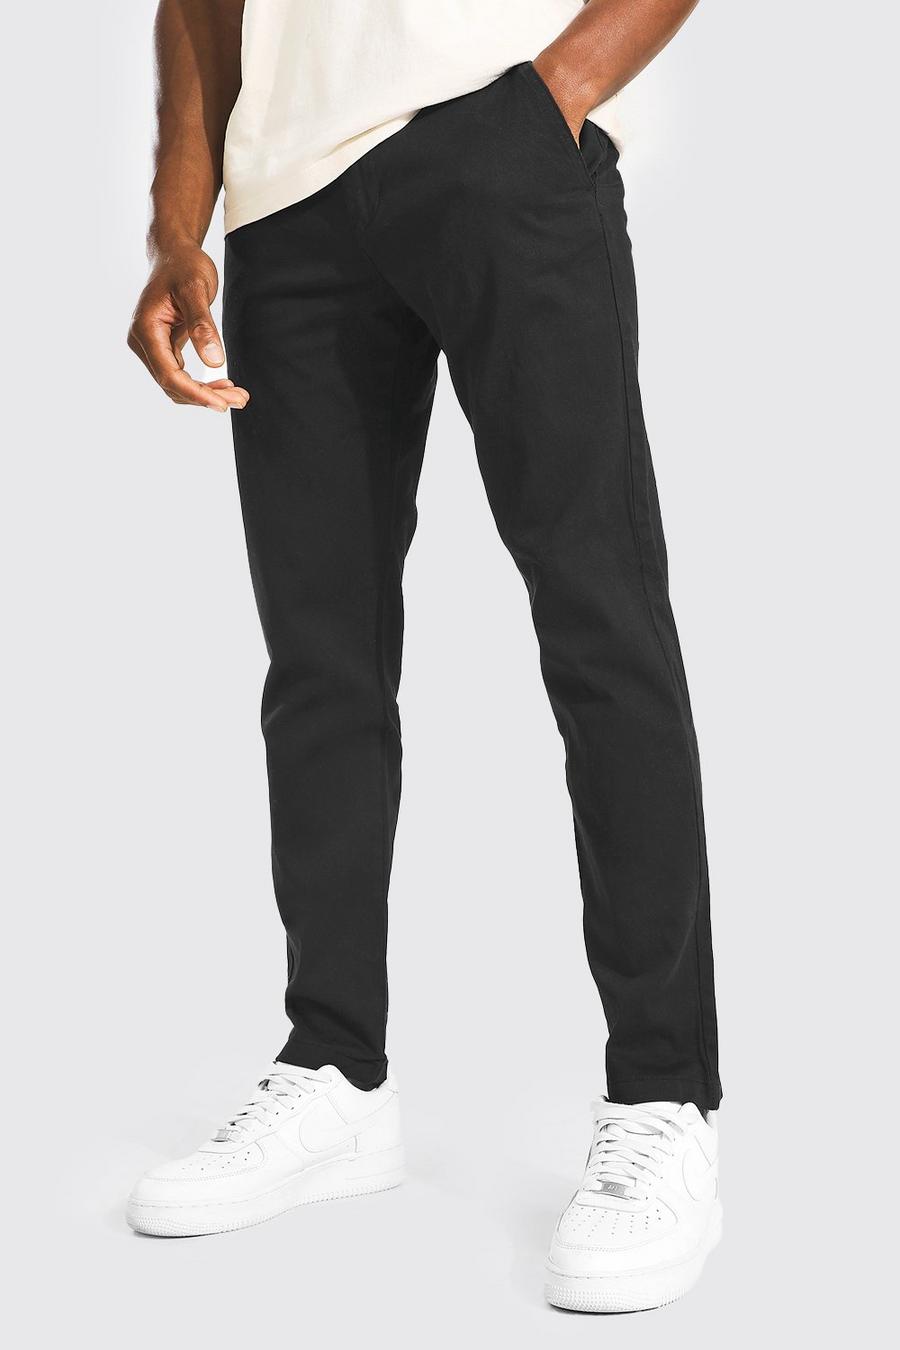 Black Skinny Fit Chino's image number 1